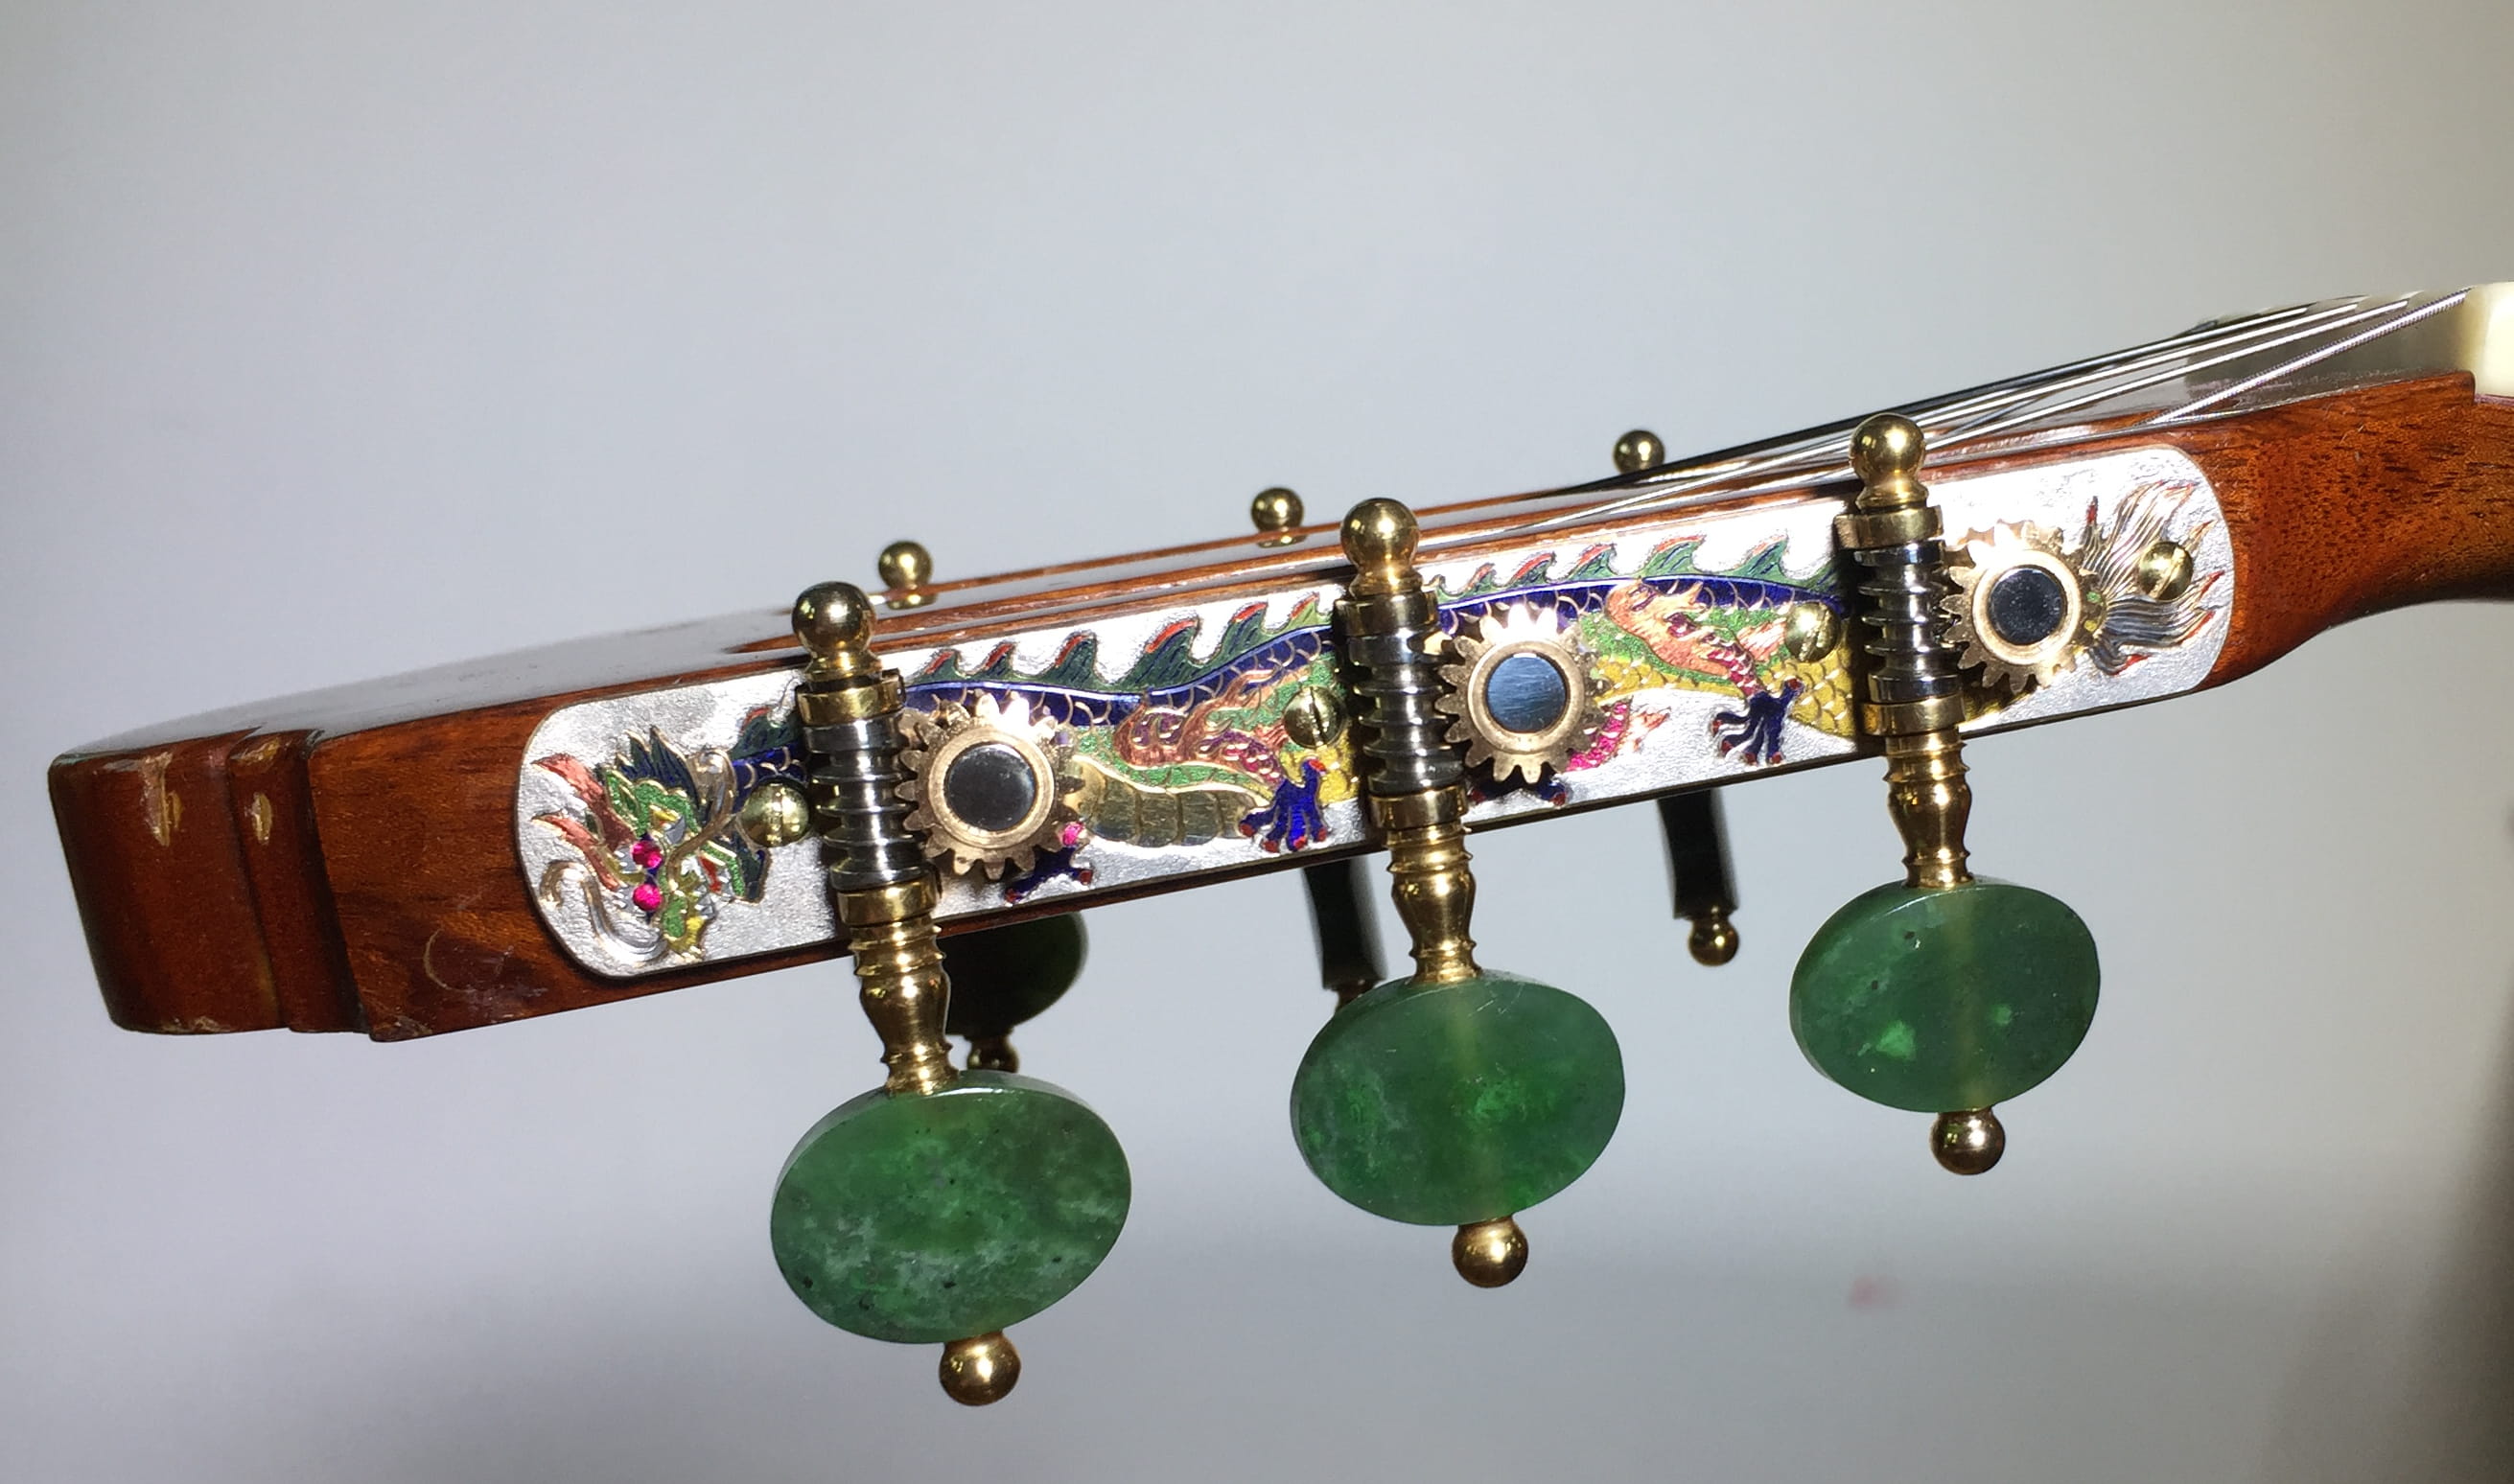 Zillmer retrofitted this flamenco guitar with special custom tuners designed specifically for him — check out the two Chinese-style dragons along with jade tuners.